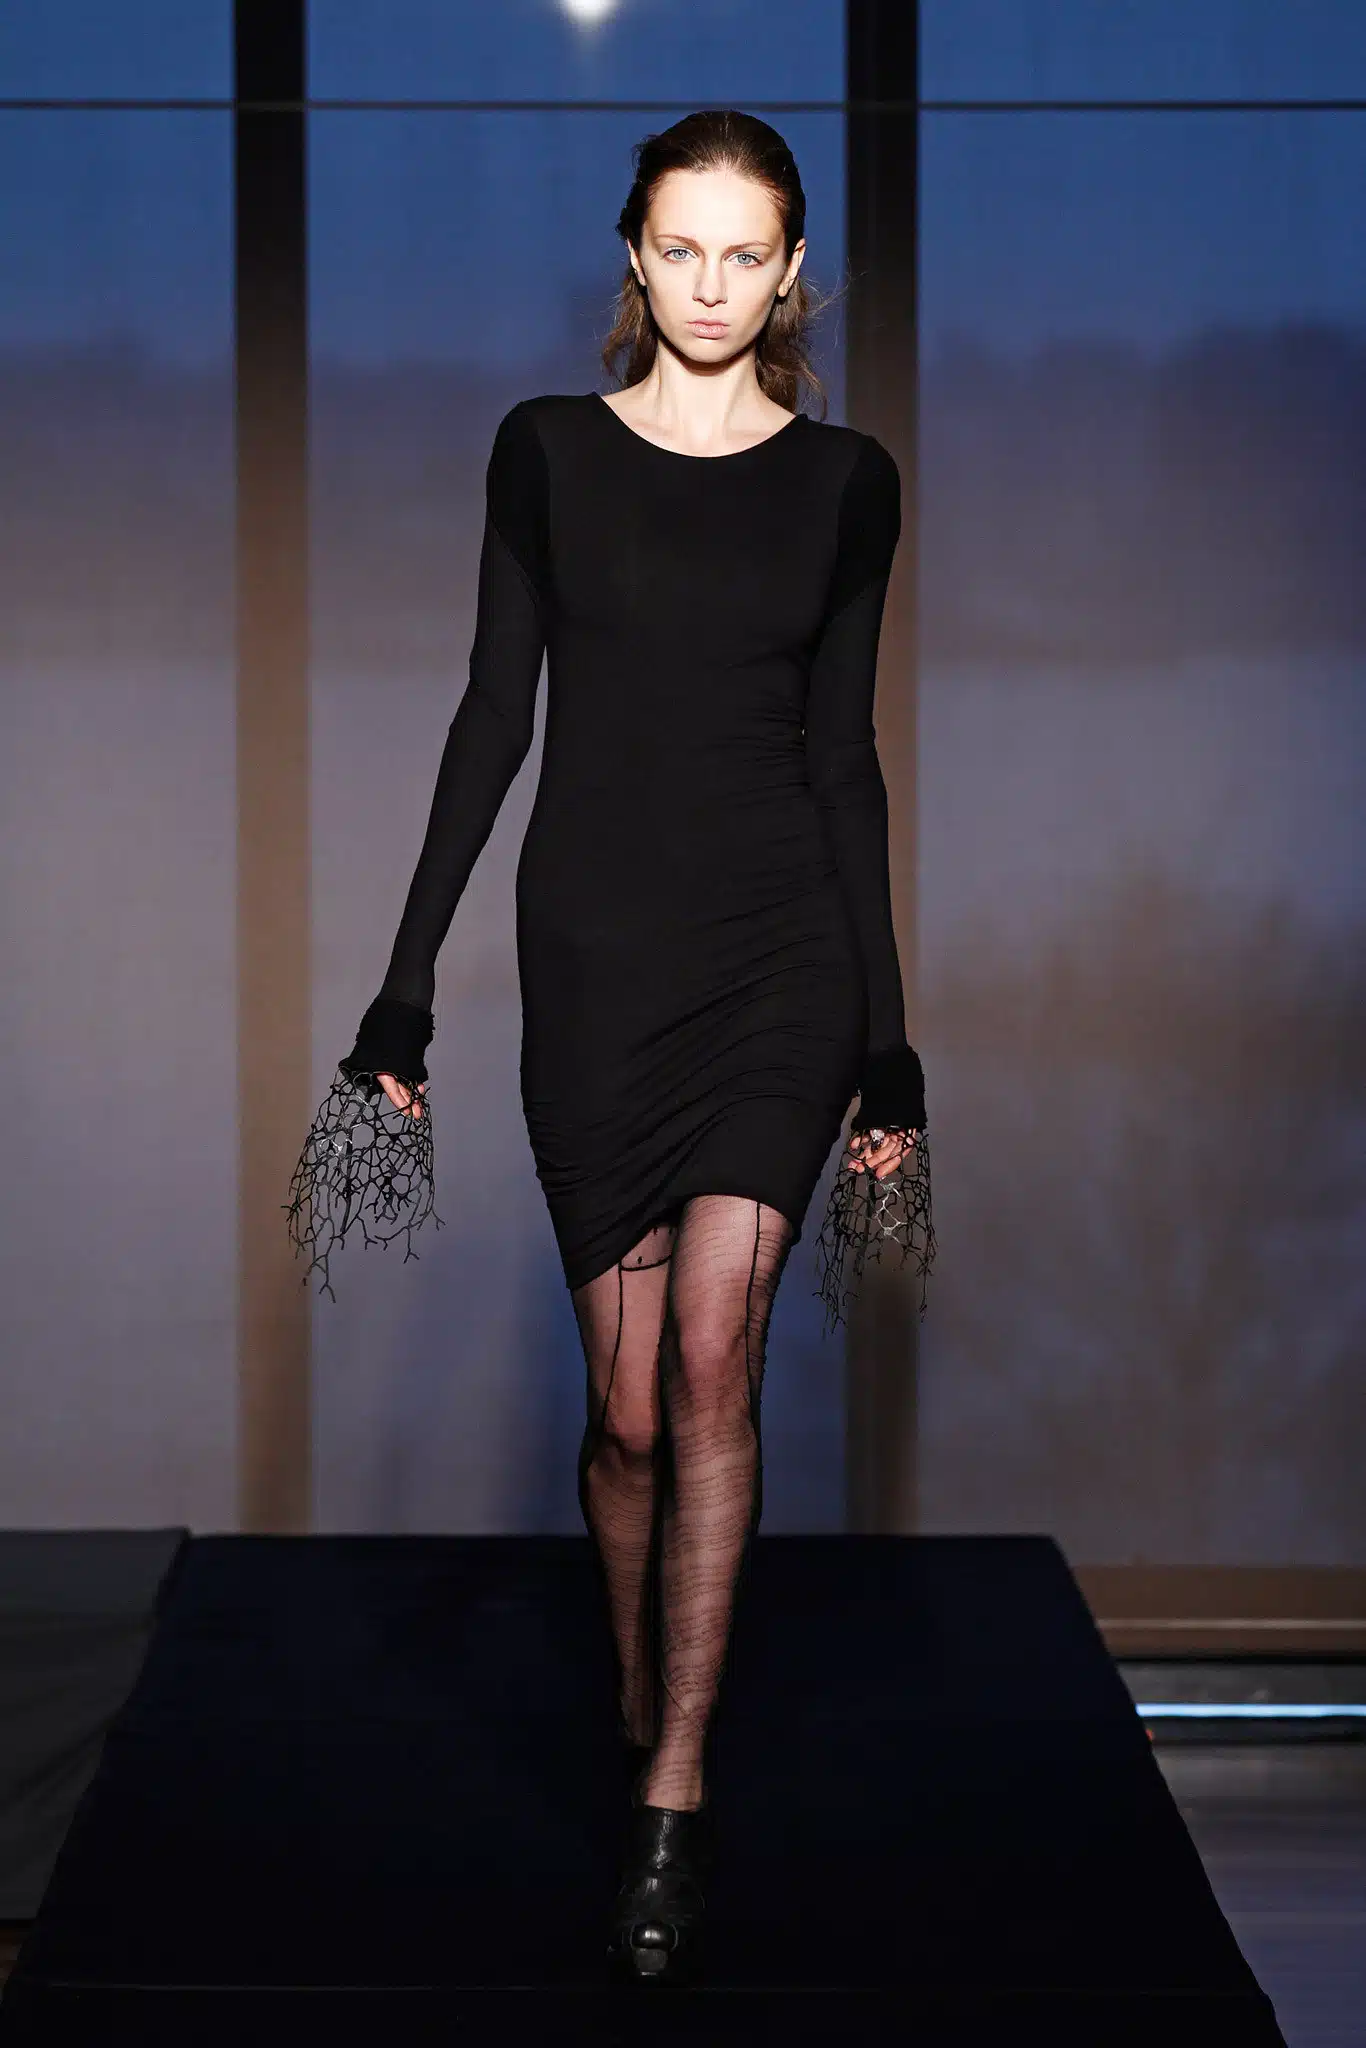 Image from FW13 SHOW Collection